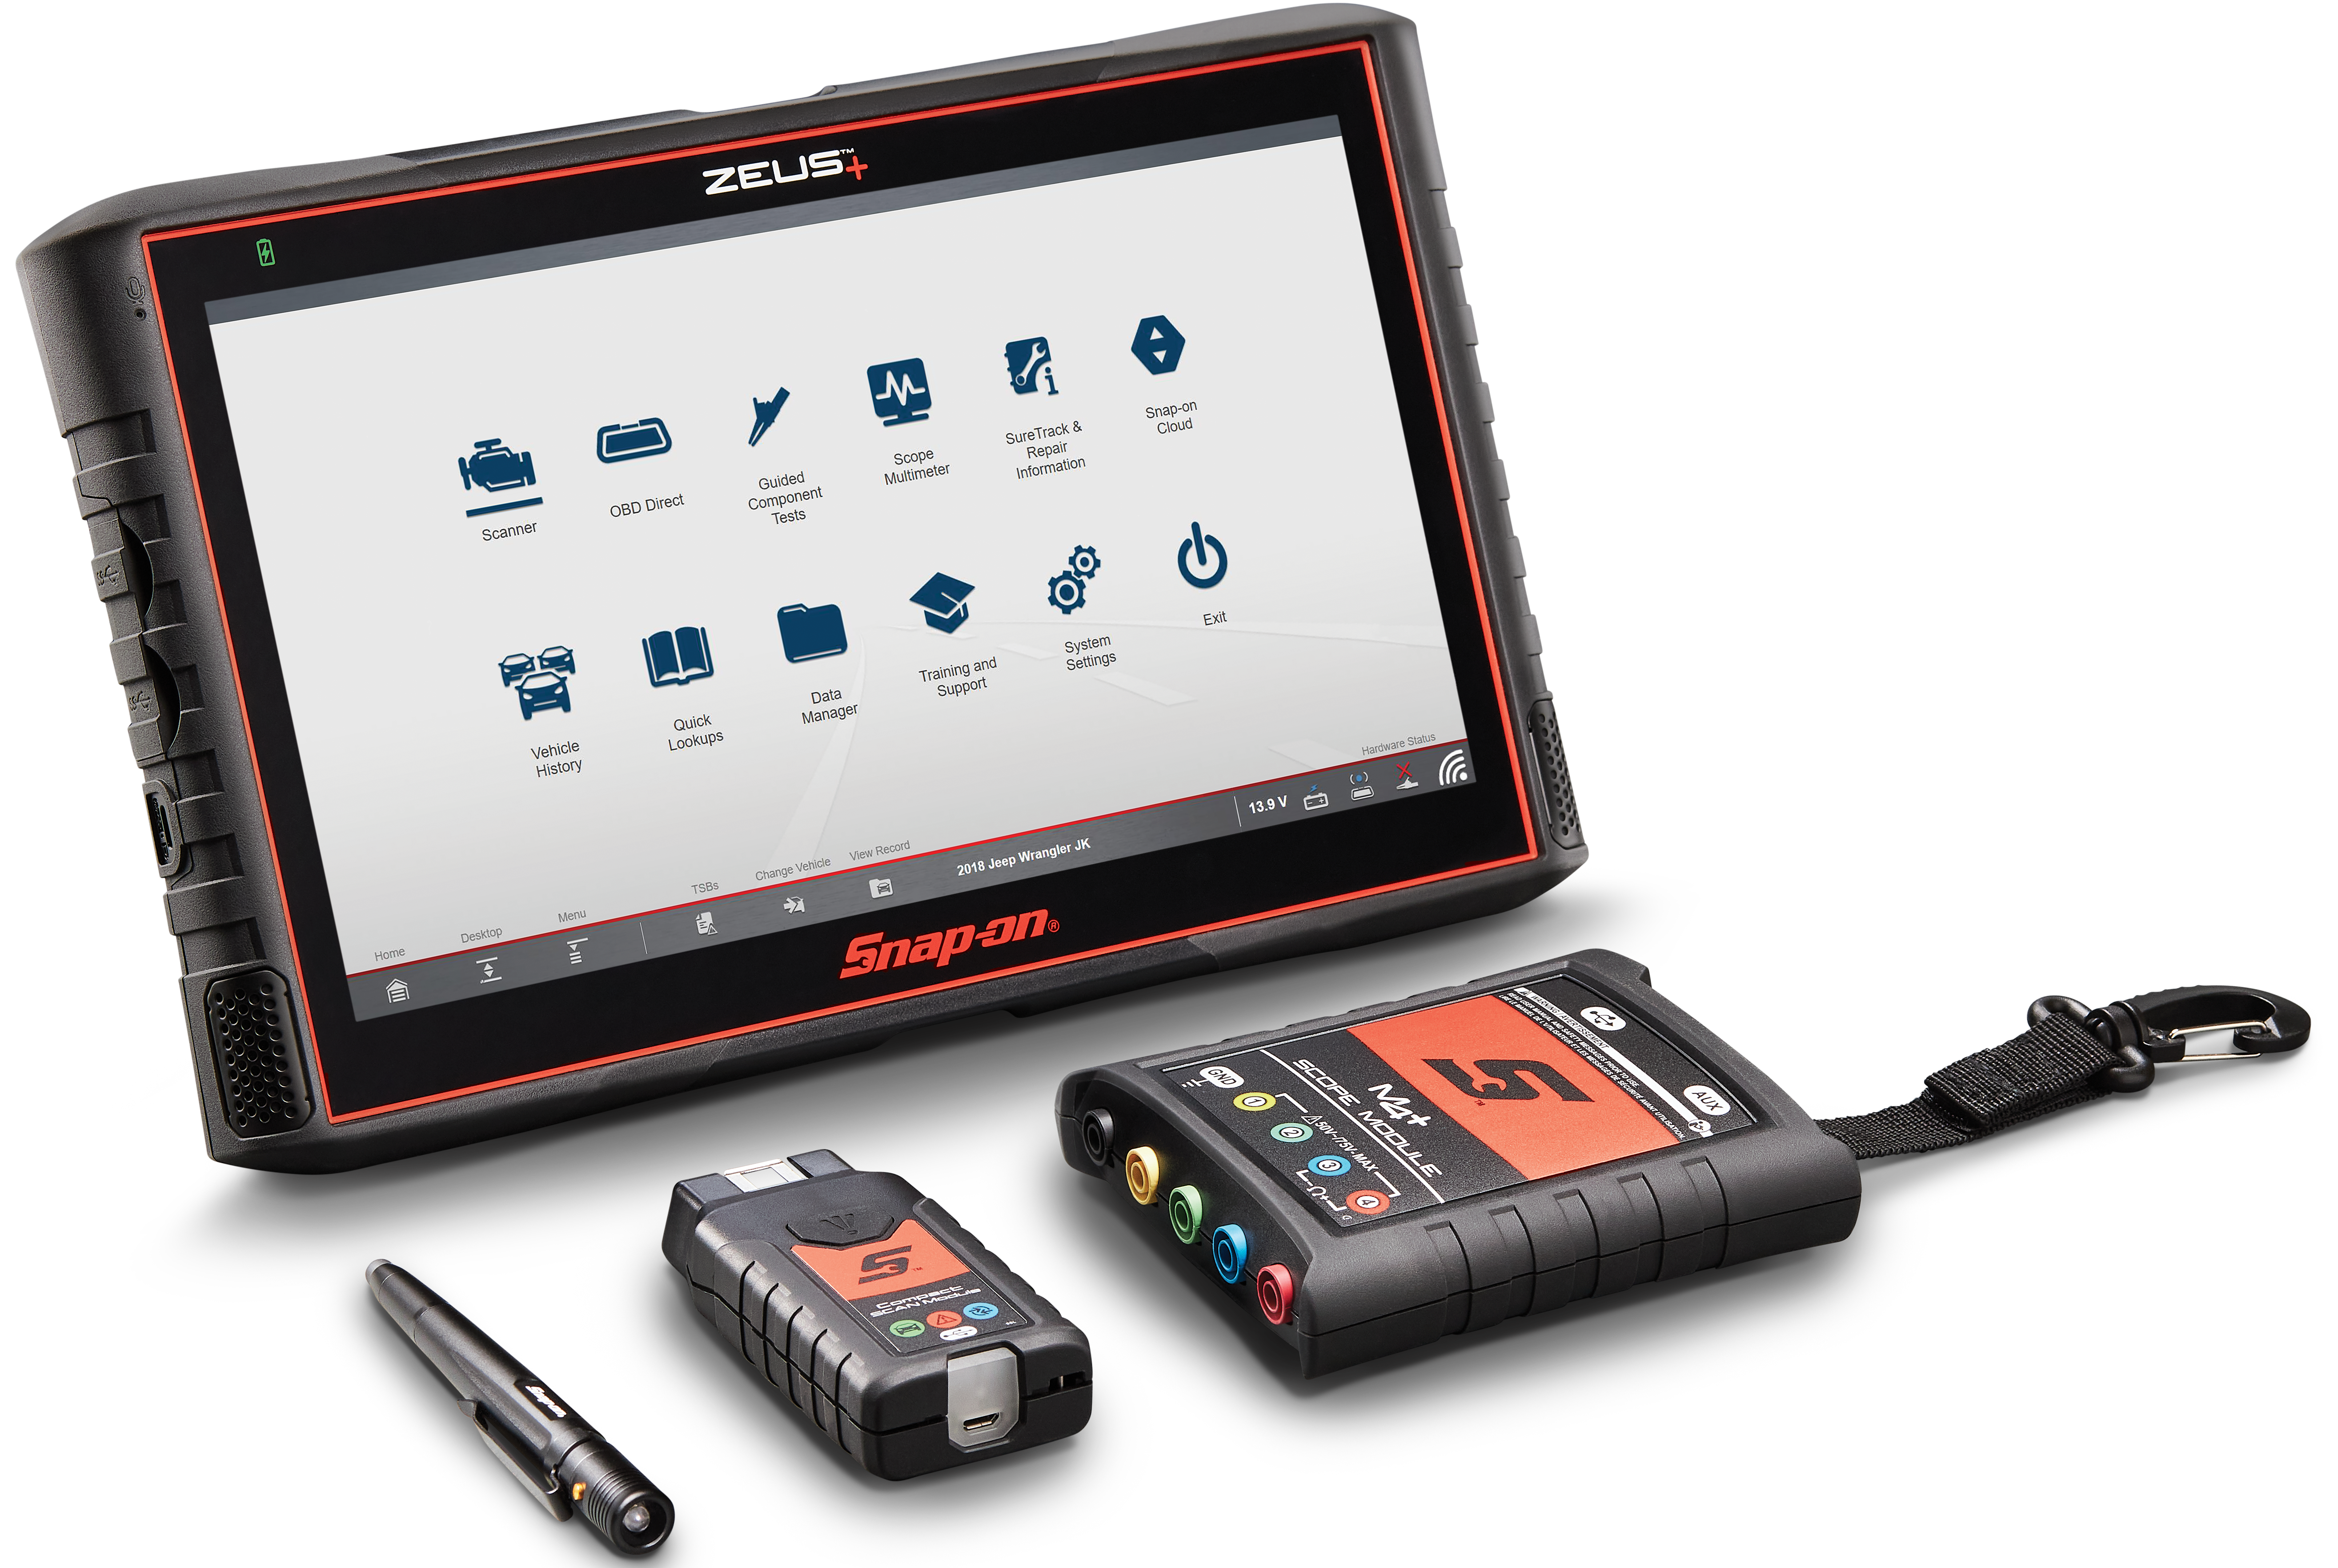 Snap-on ZEUS+ Diagnostic and Information System